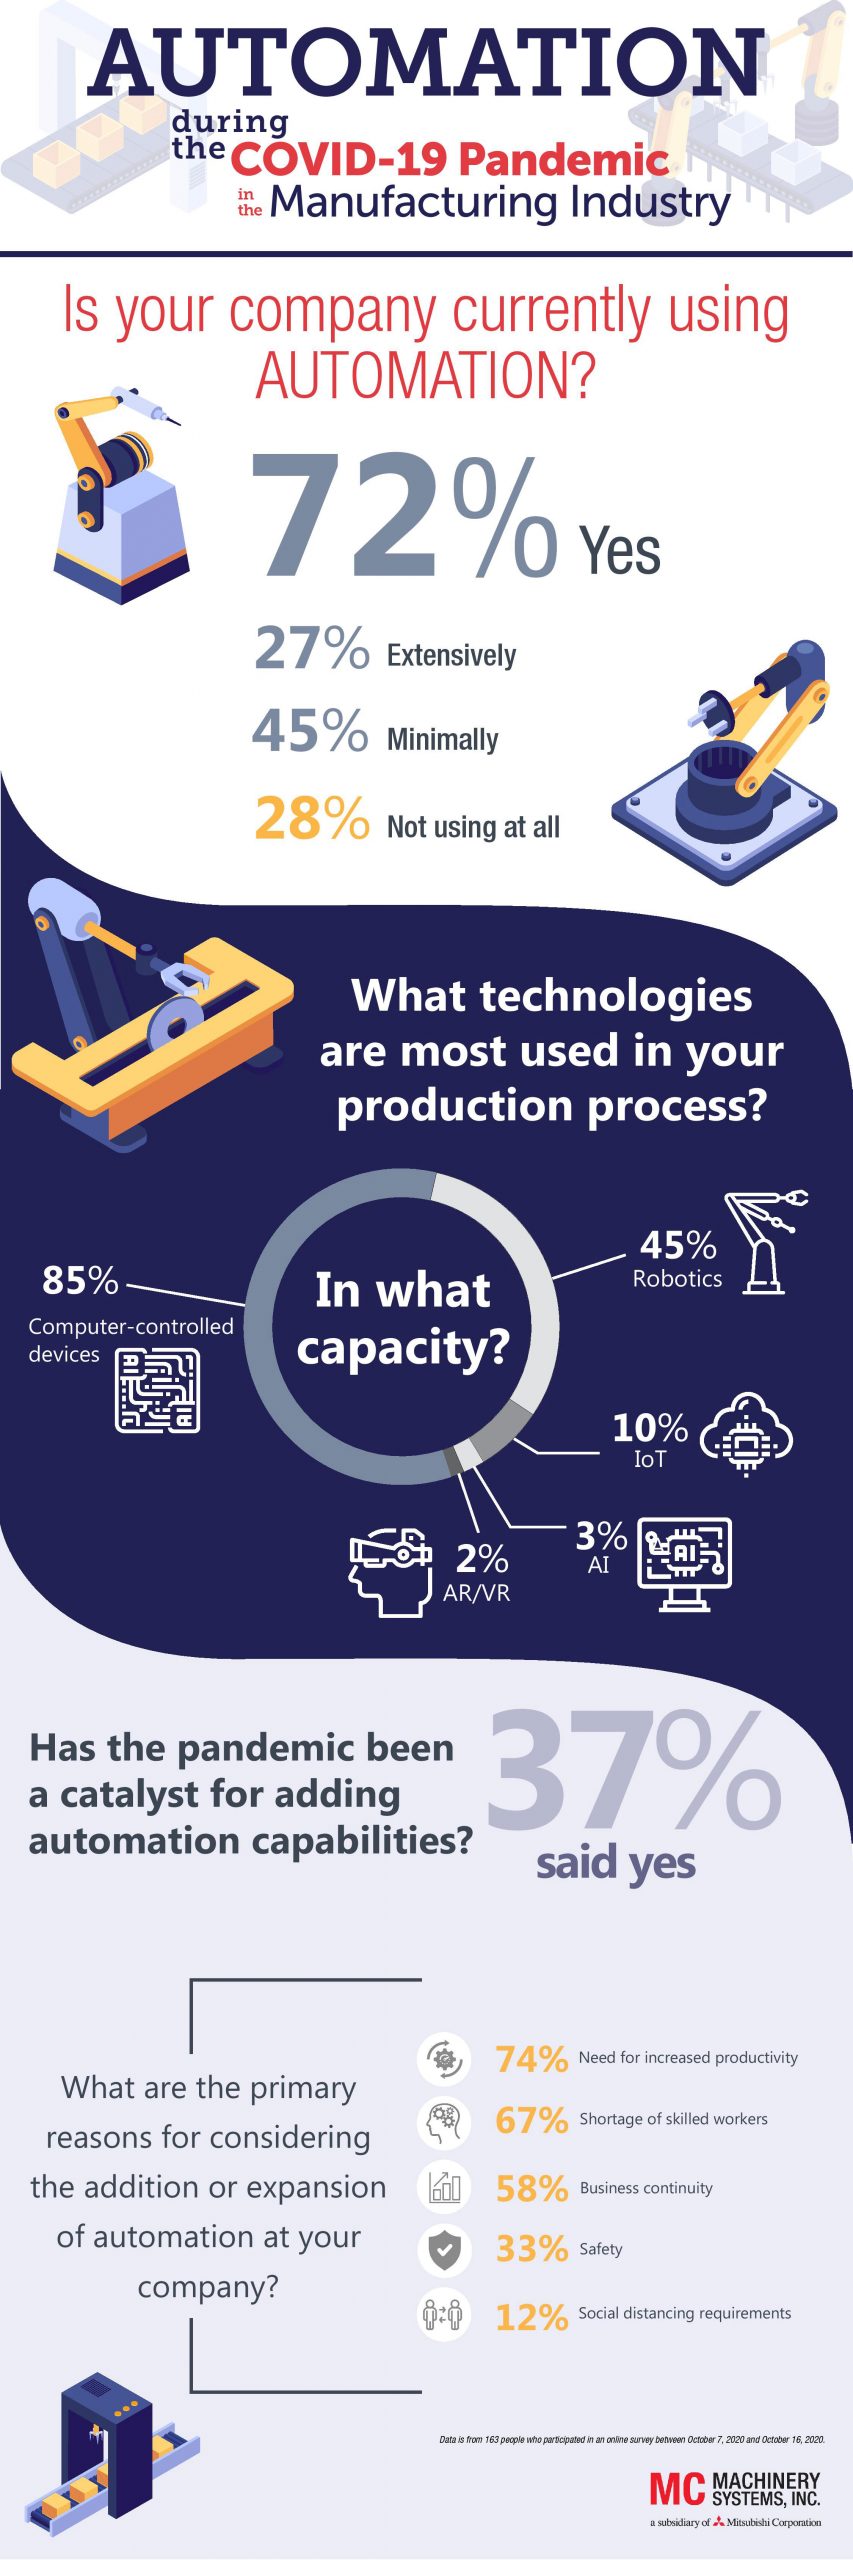 MC Machinery Automation Infographic 2020 FINAL Scaled, Industry Today